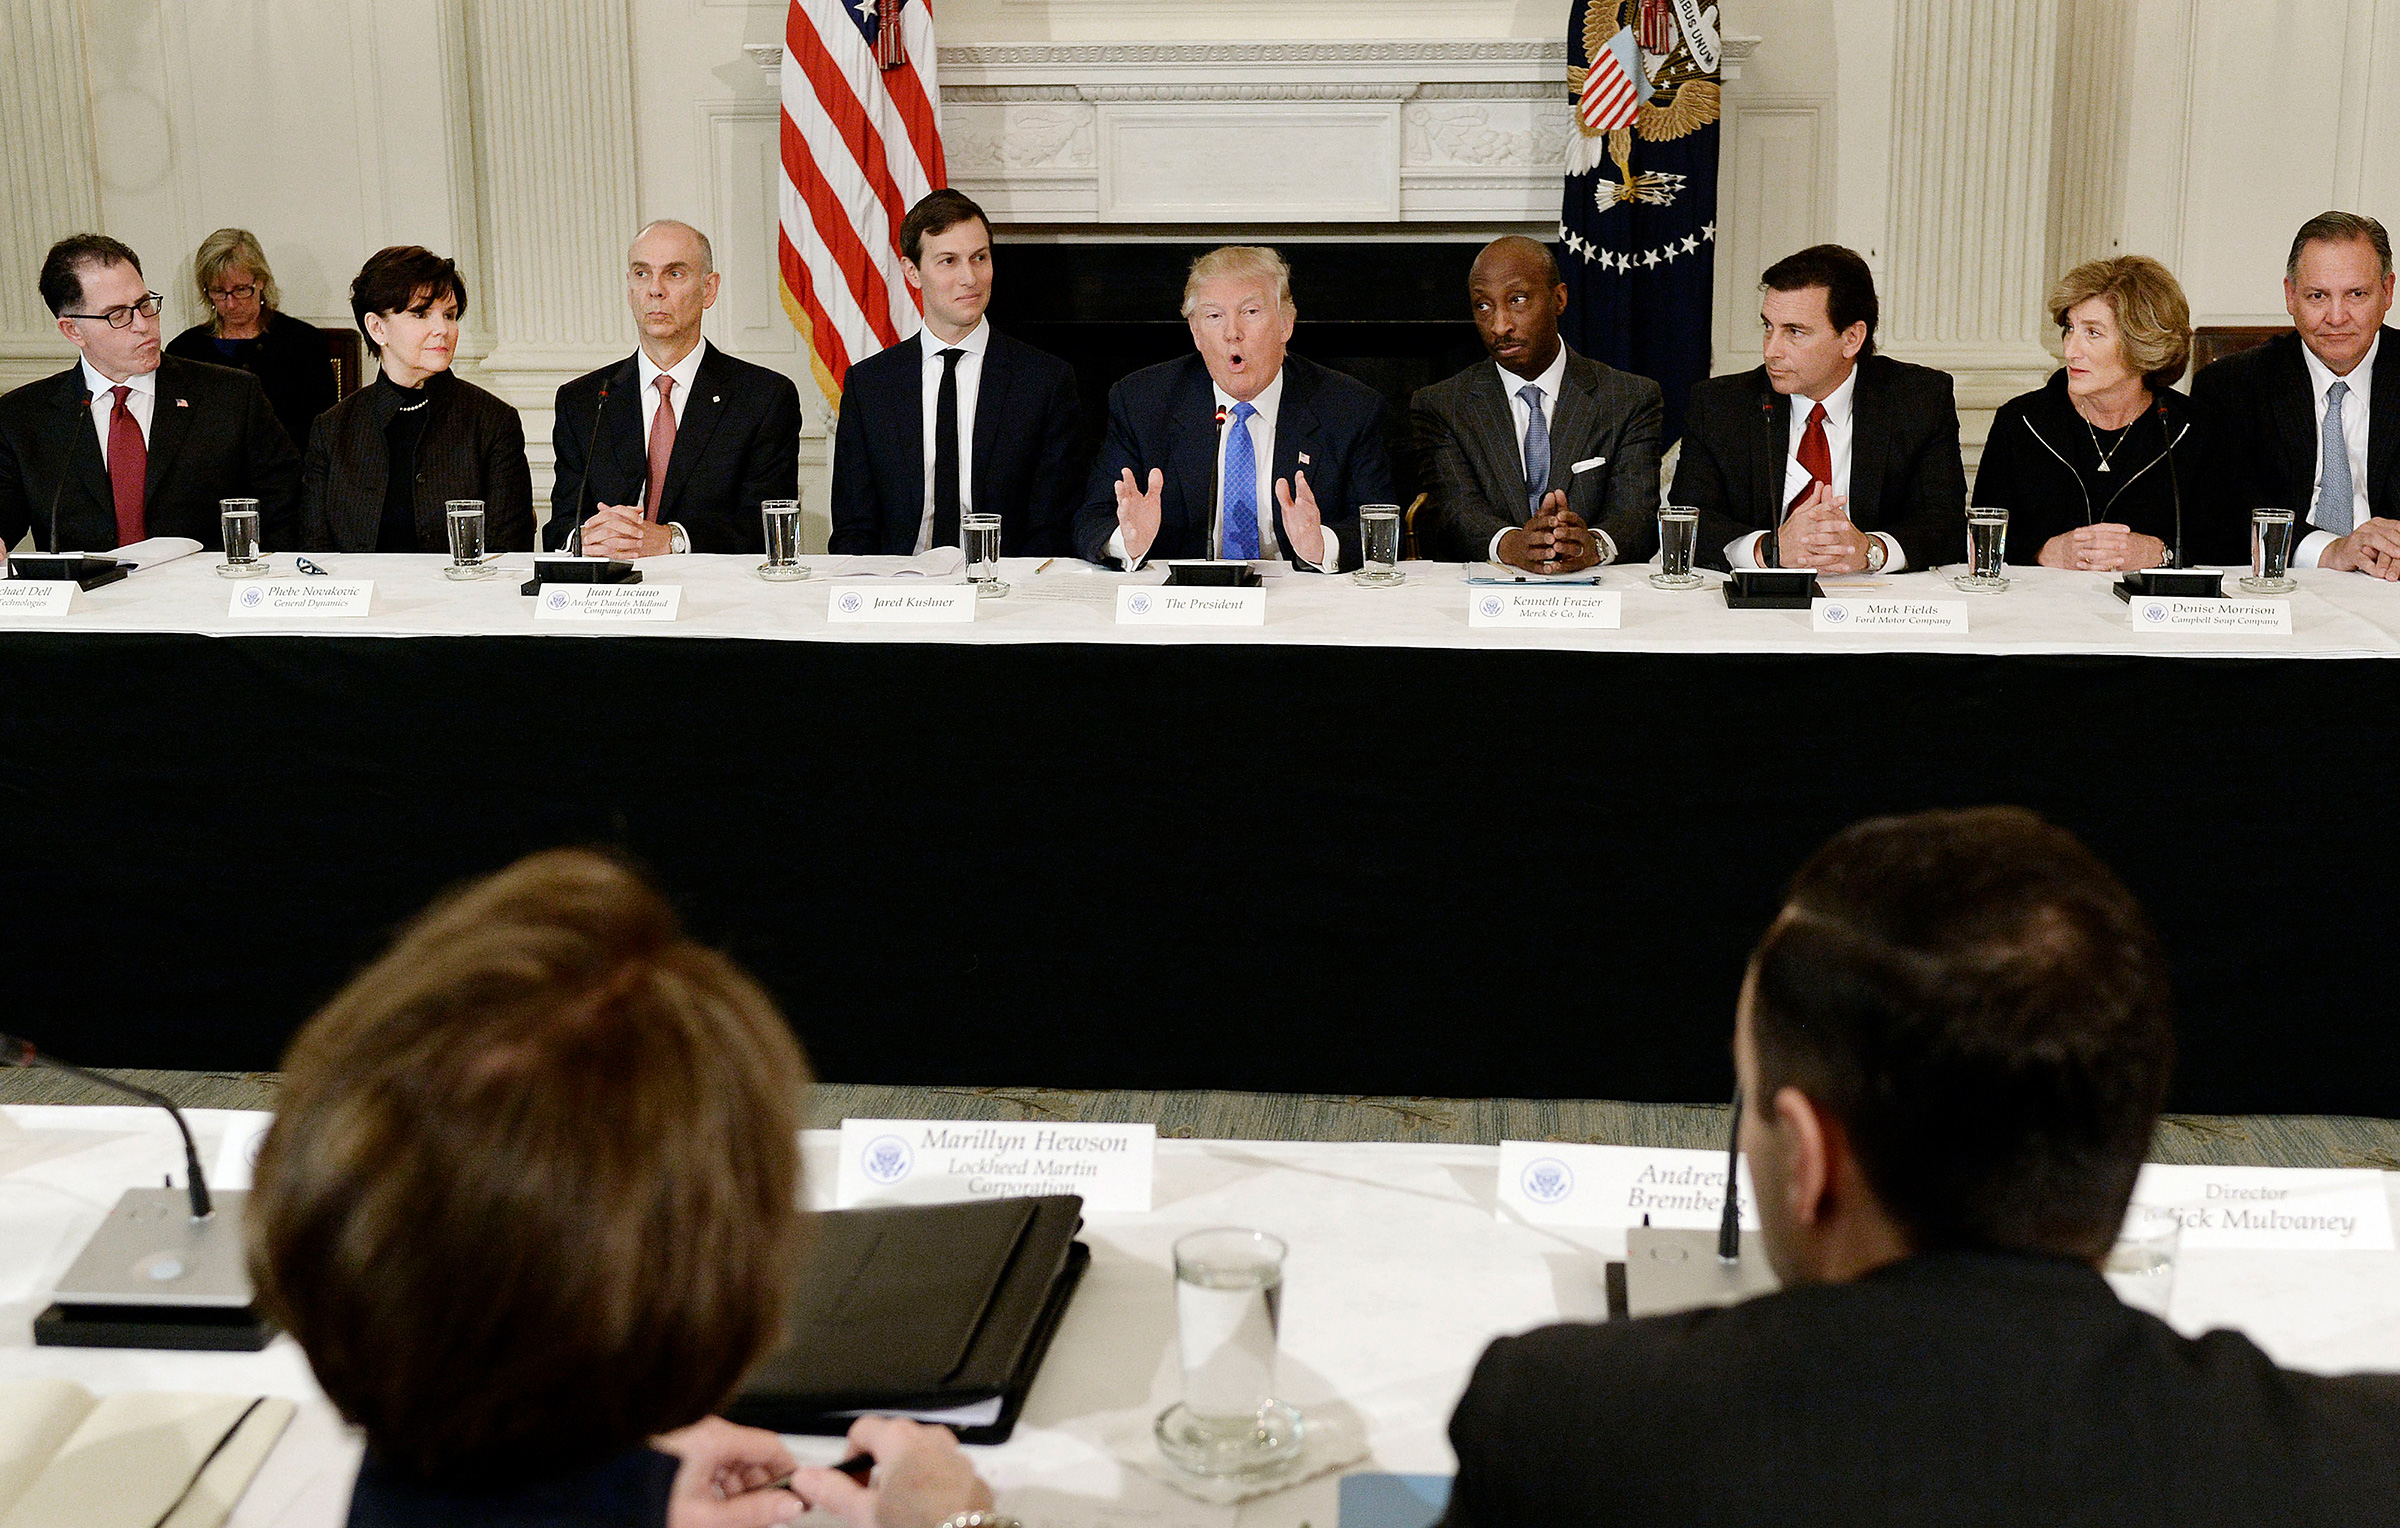 A business council convened by Trump, pictured in February 2017, broke up within months. From left: Michael Dell, Dell; Phebe Novakovic, General Dynamics; Juan Luciano, Archer Daniels Midland; Jared Kushner; Donald Trump; Kenneth Frazier, Merck; Mark Fields, Ford; Denise Morrison, Campbell Soup; Greg Hayes, United Technologies. (Olivier Douliery—Bloomberg/Getty Images)